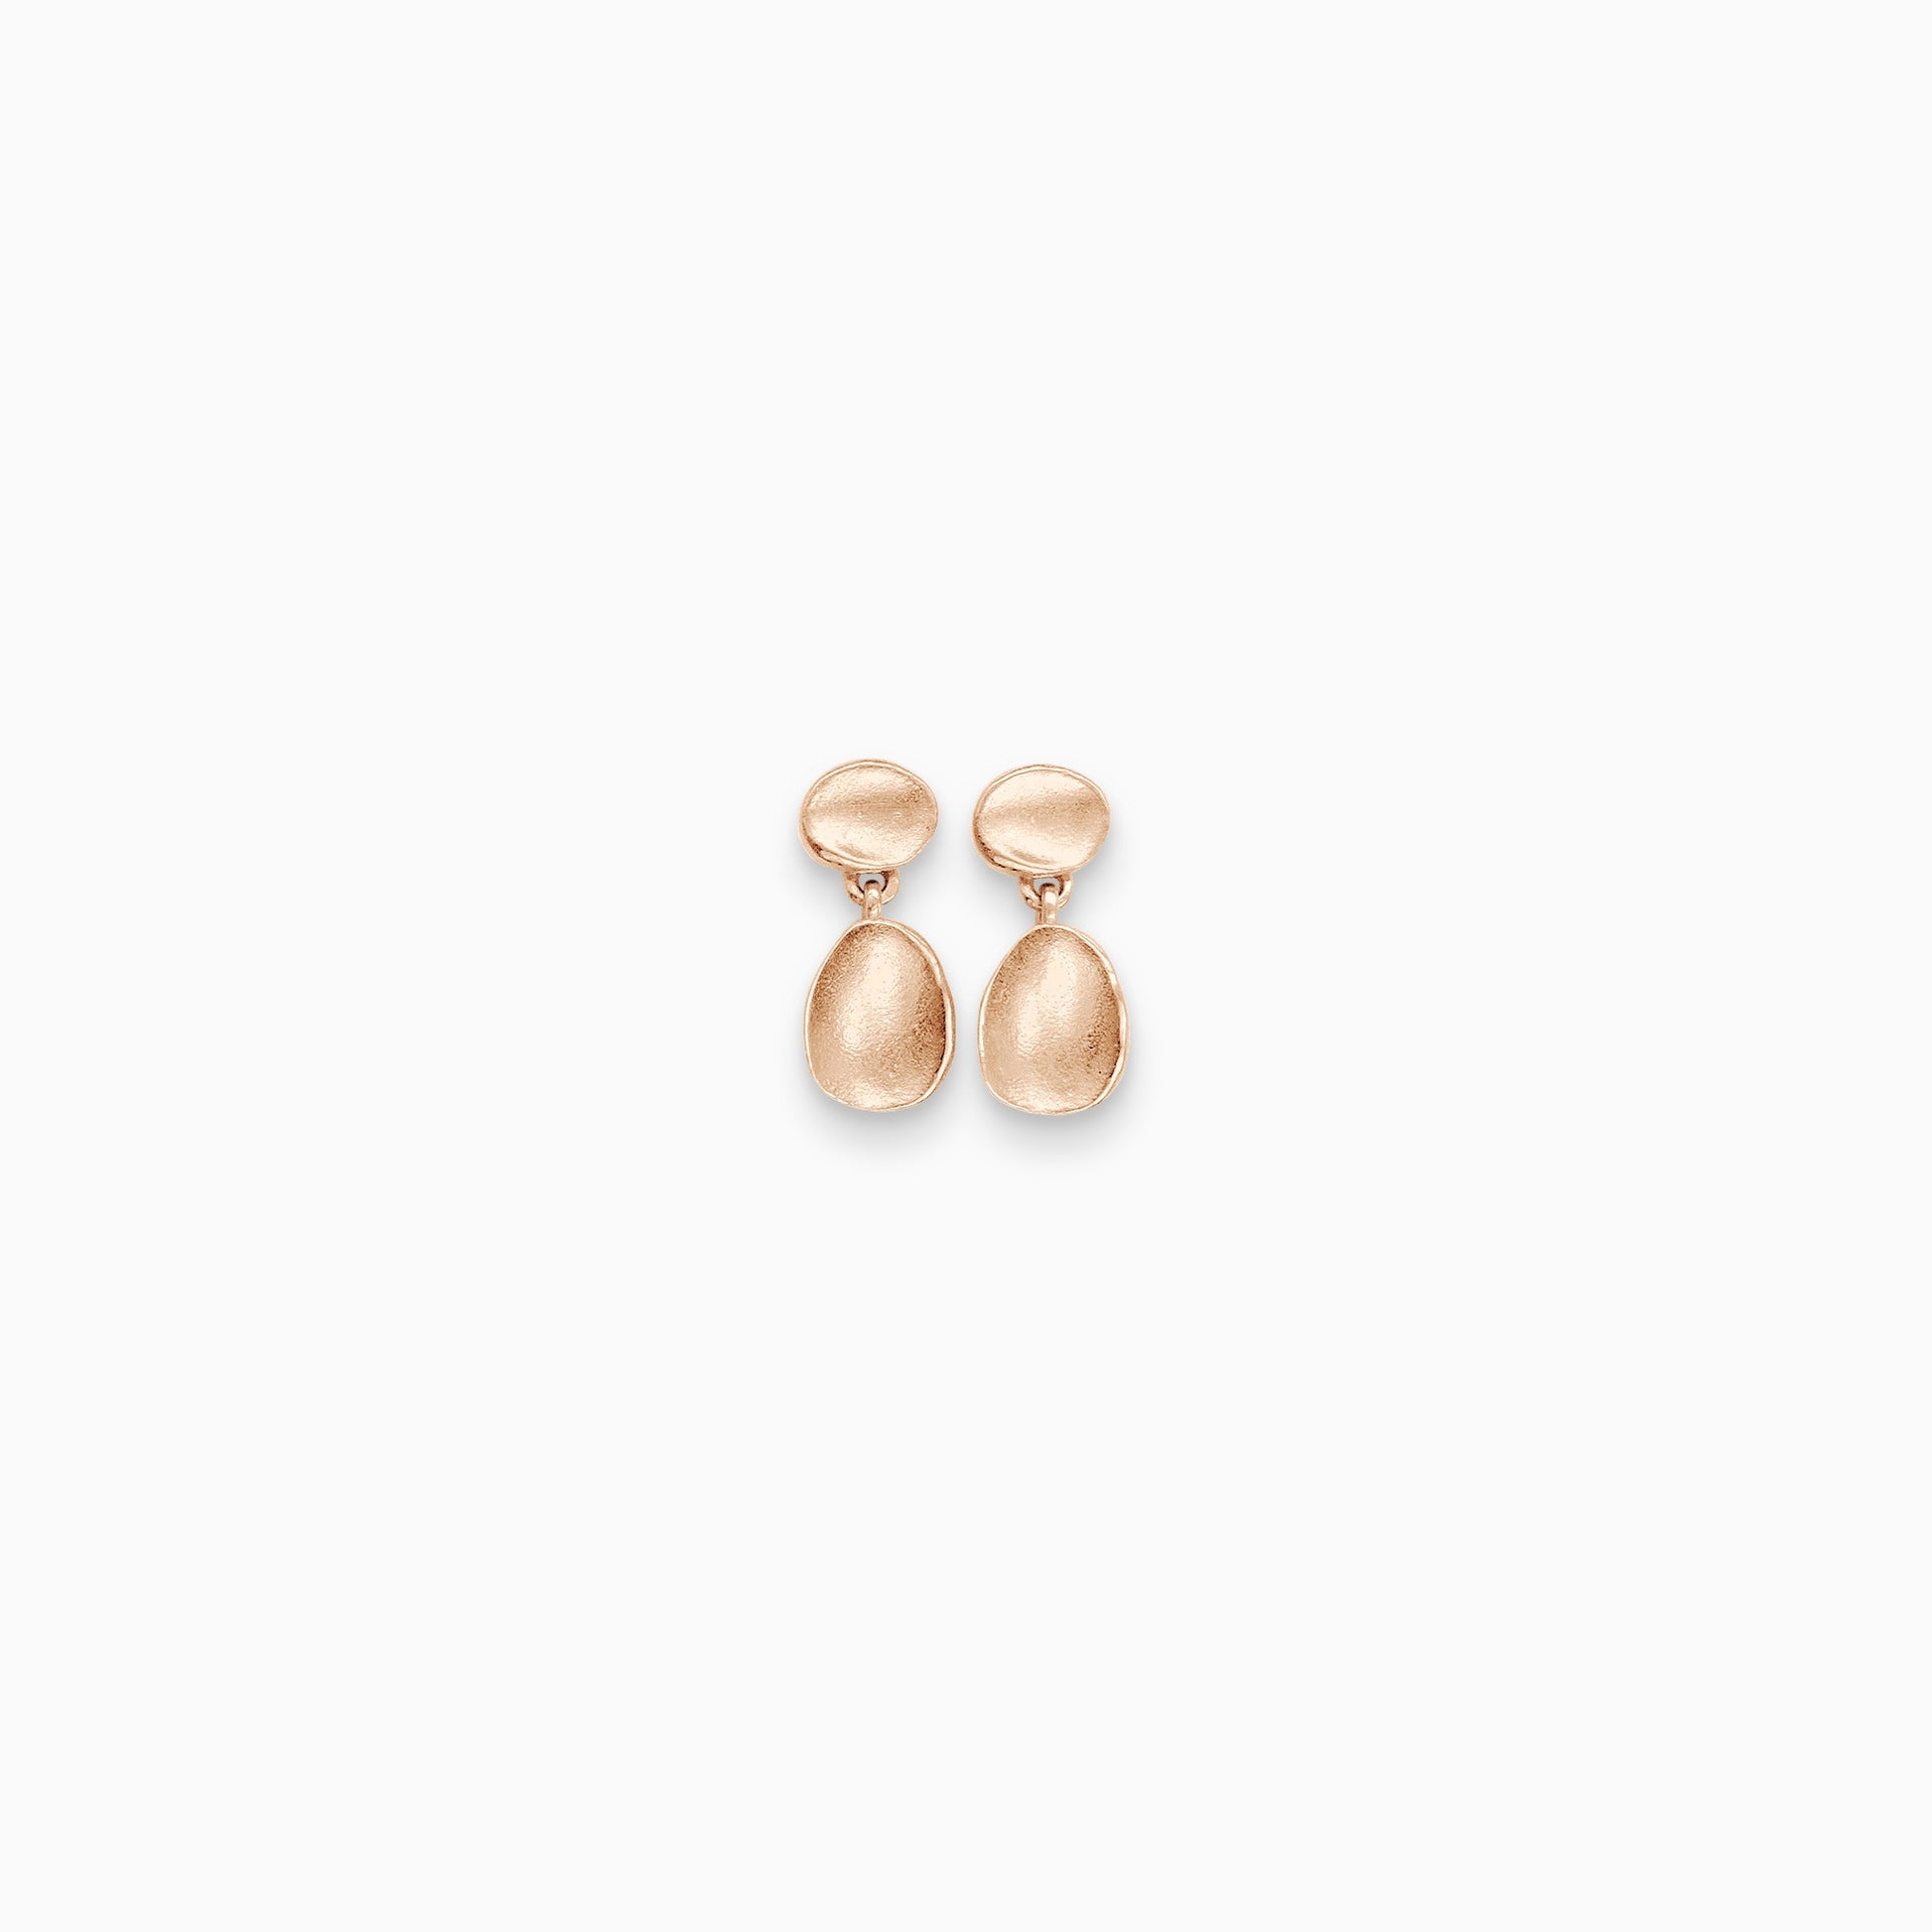 A pair of 18ct Fairtrade rose gold small earrings, a dainty concave oval disc has an stud ear fastening and hanging below is another slightly larger oval disc. Satin finish. 15mm length, 6mm width